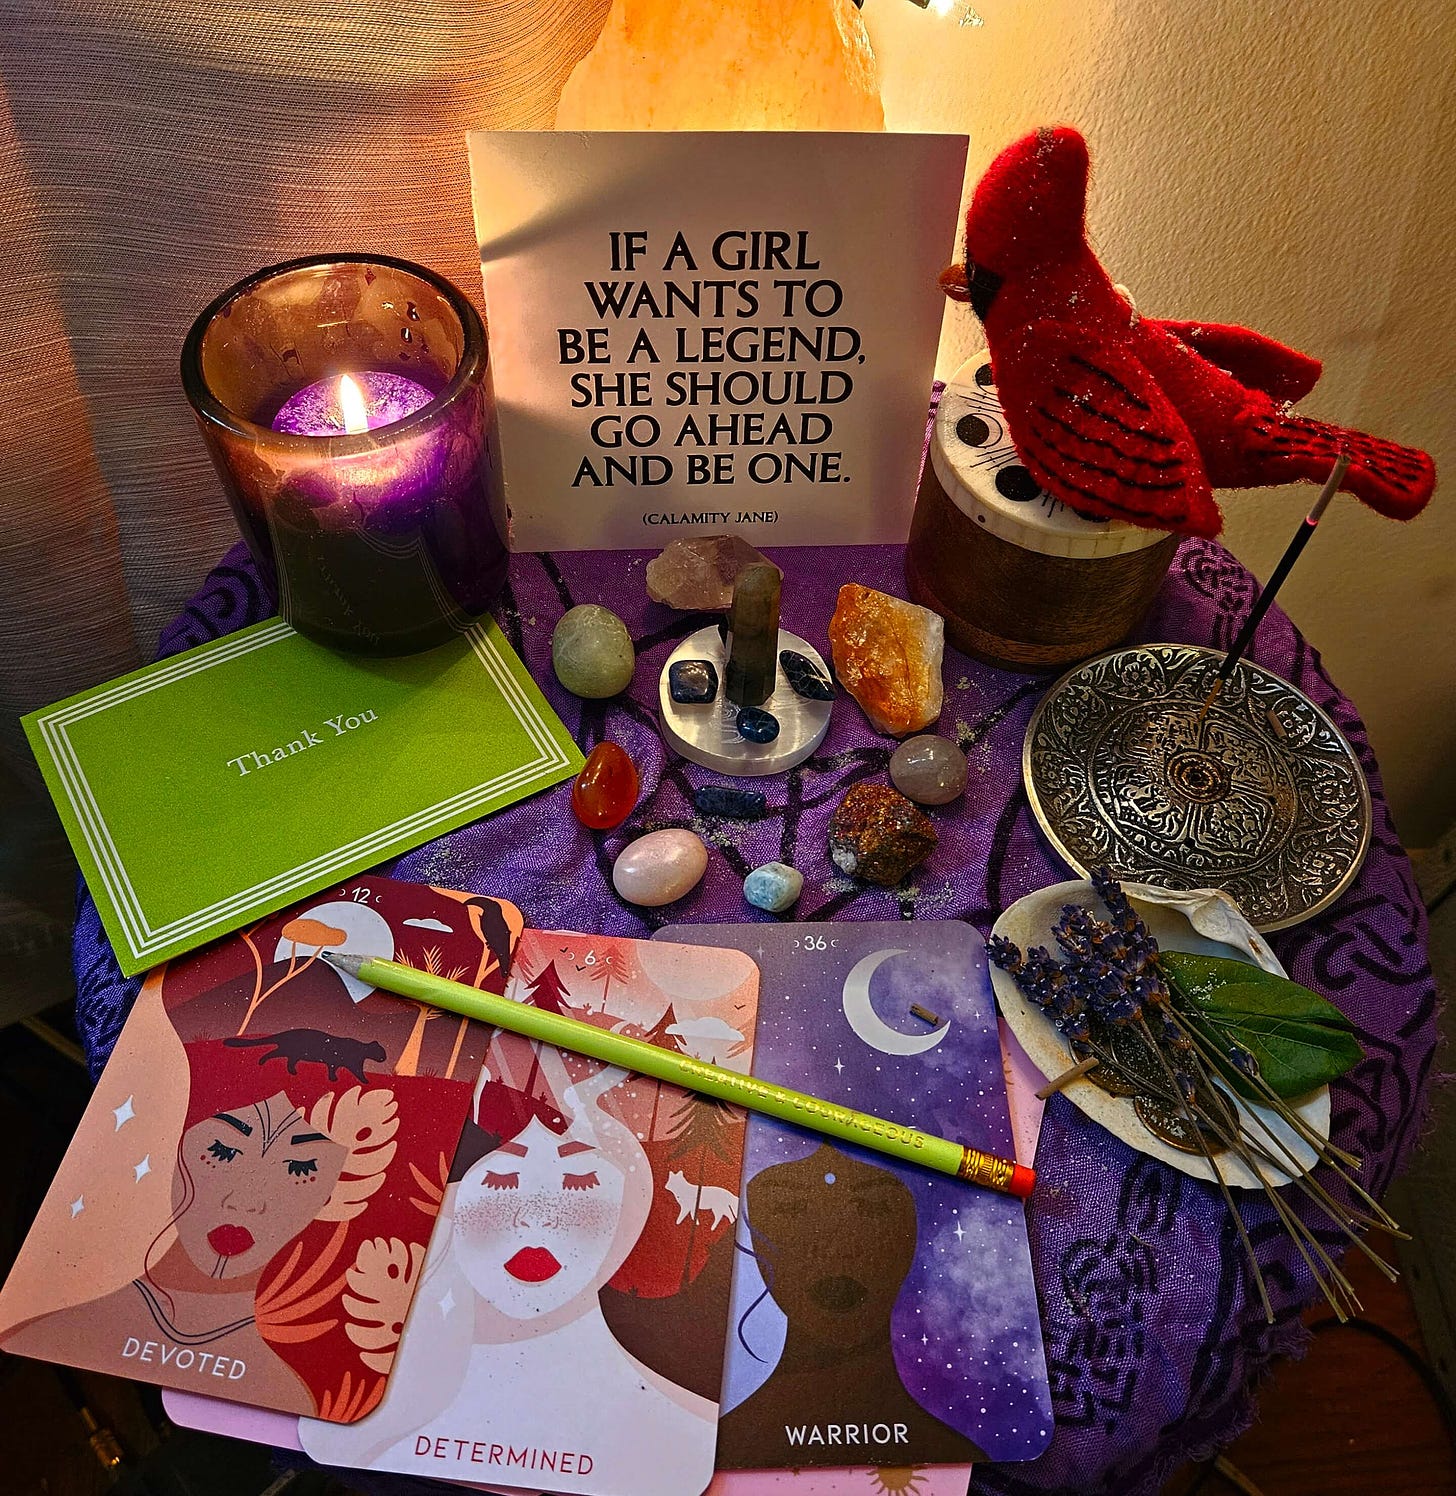 Writer Altar with candles, incense, oracle cards that read Devoted, Determined, and Warrior. Goals written in a "thank you" card, crystals, flowers, leaves, shells, and a felt cardinal. A quote by Calamity Jane reads "If a girl wants to be a legend, she should go ahead and be one."